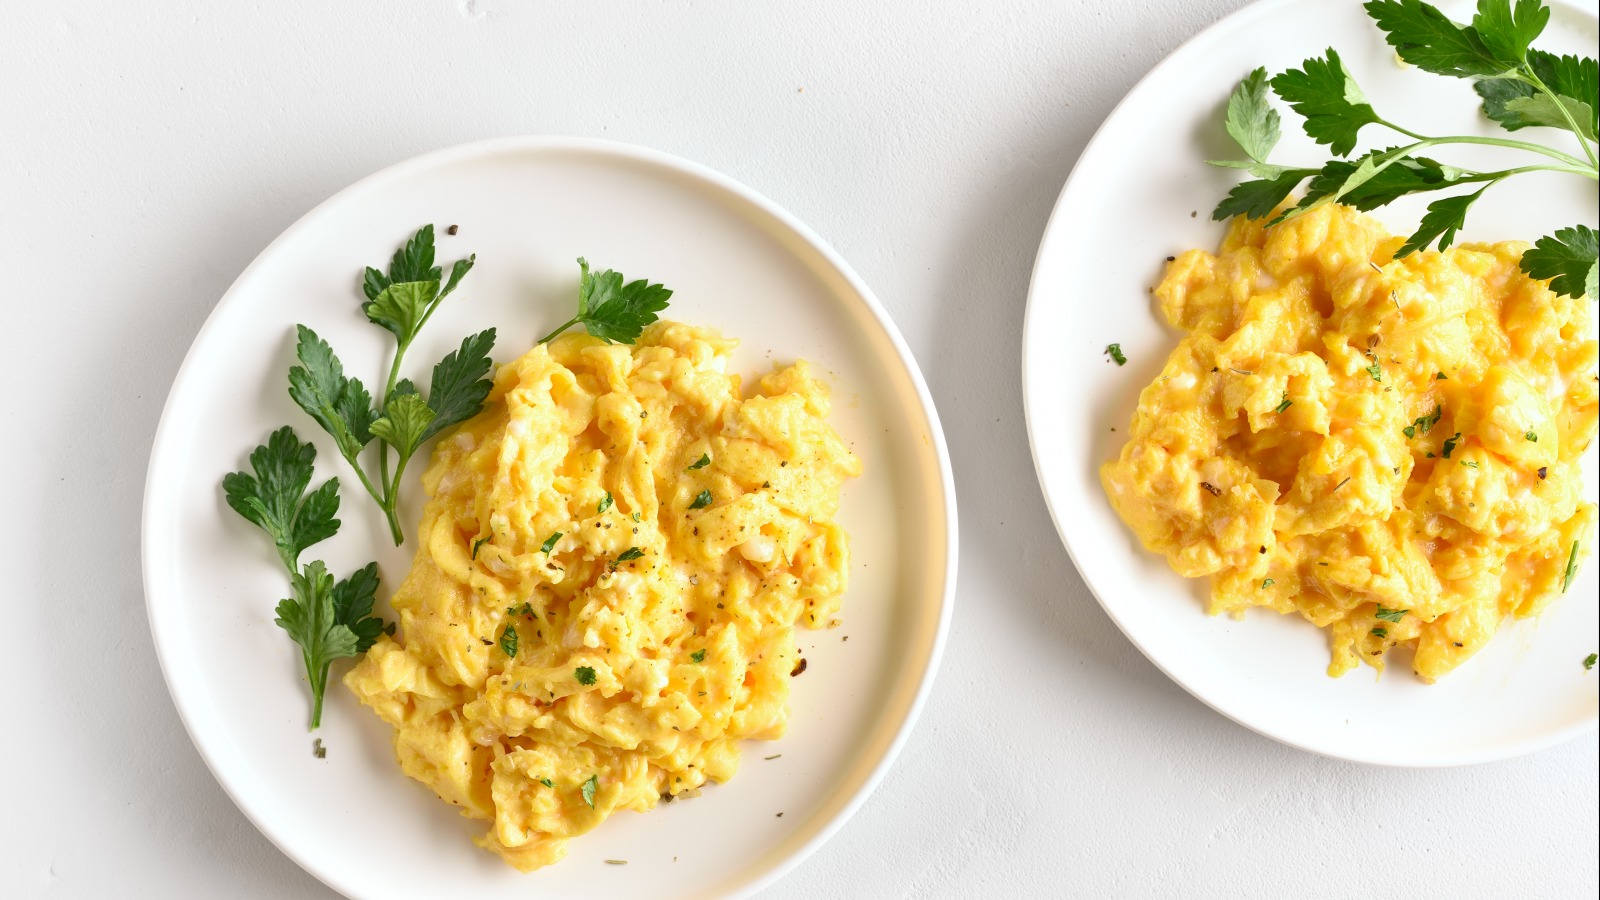 https://www.mashed.com/img/gallery/this-simple-trick-will-take-your-scrambled-eggs-to-the-next-level/l-intro-1603999860.jpg